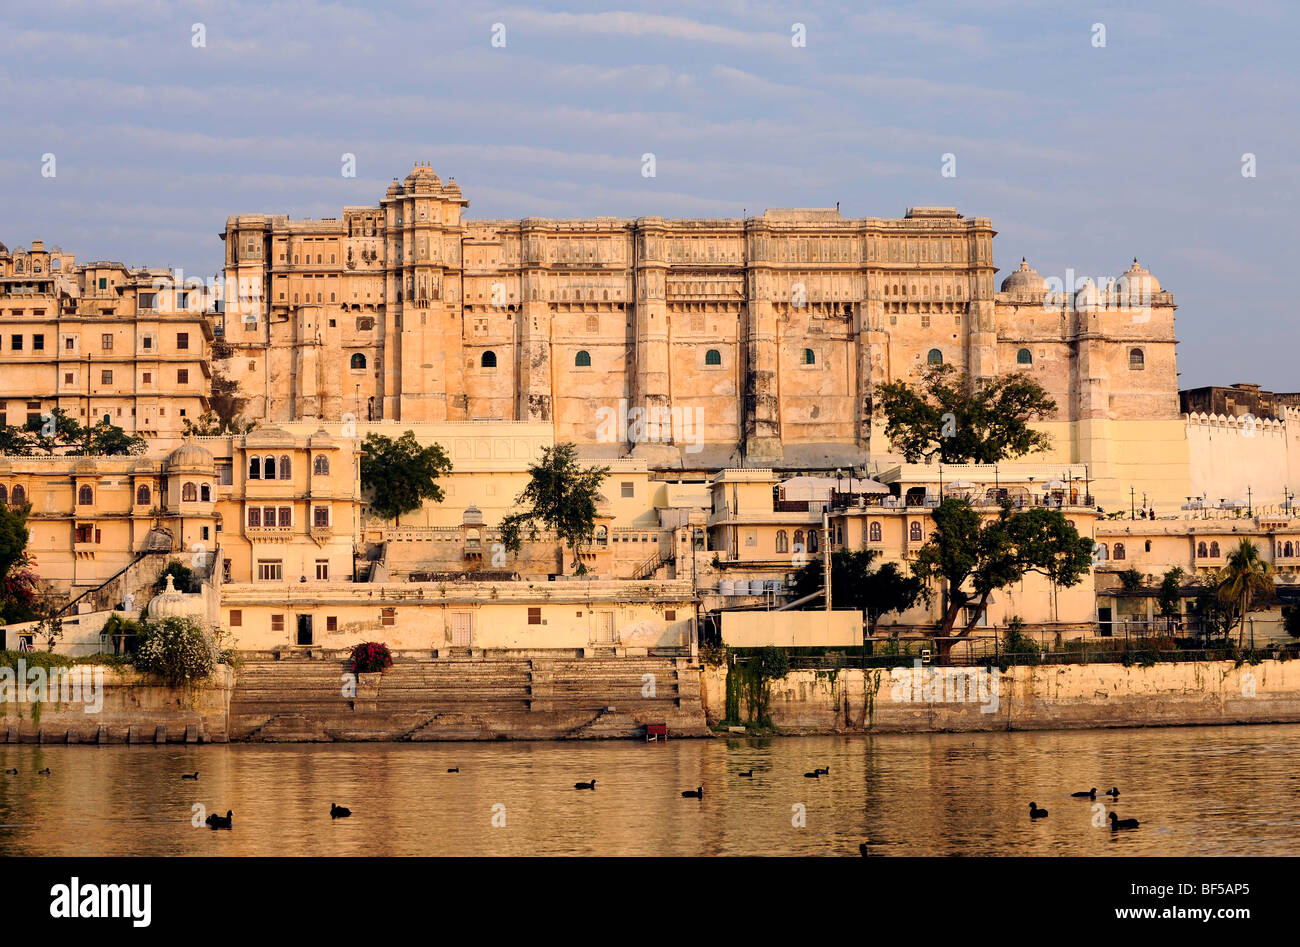 City Palace on Lake Pichola in the evening twilight, Udaipur, Rajasthan, North India, India, South Asia, Asia Stock Photo